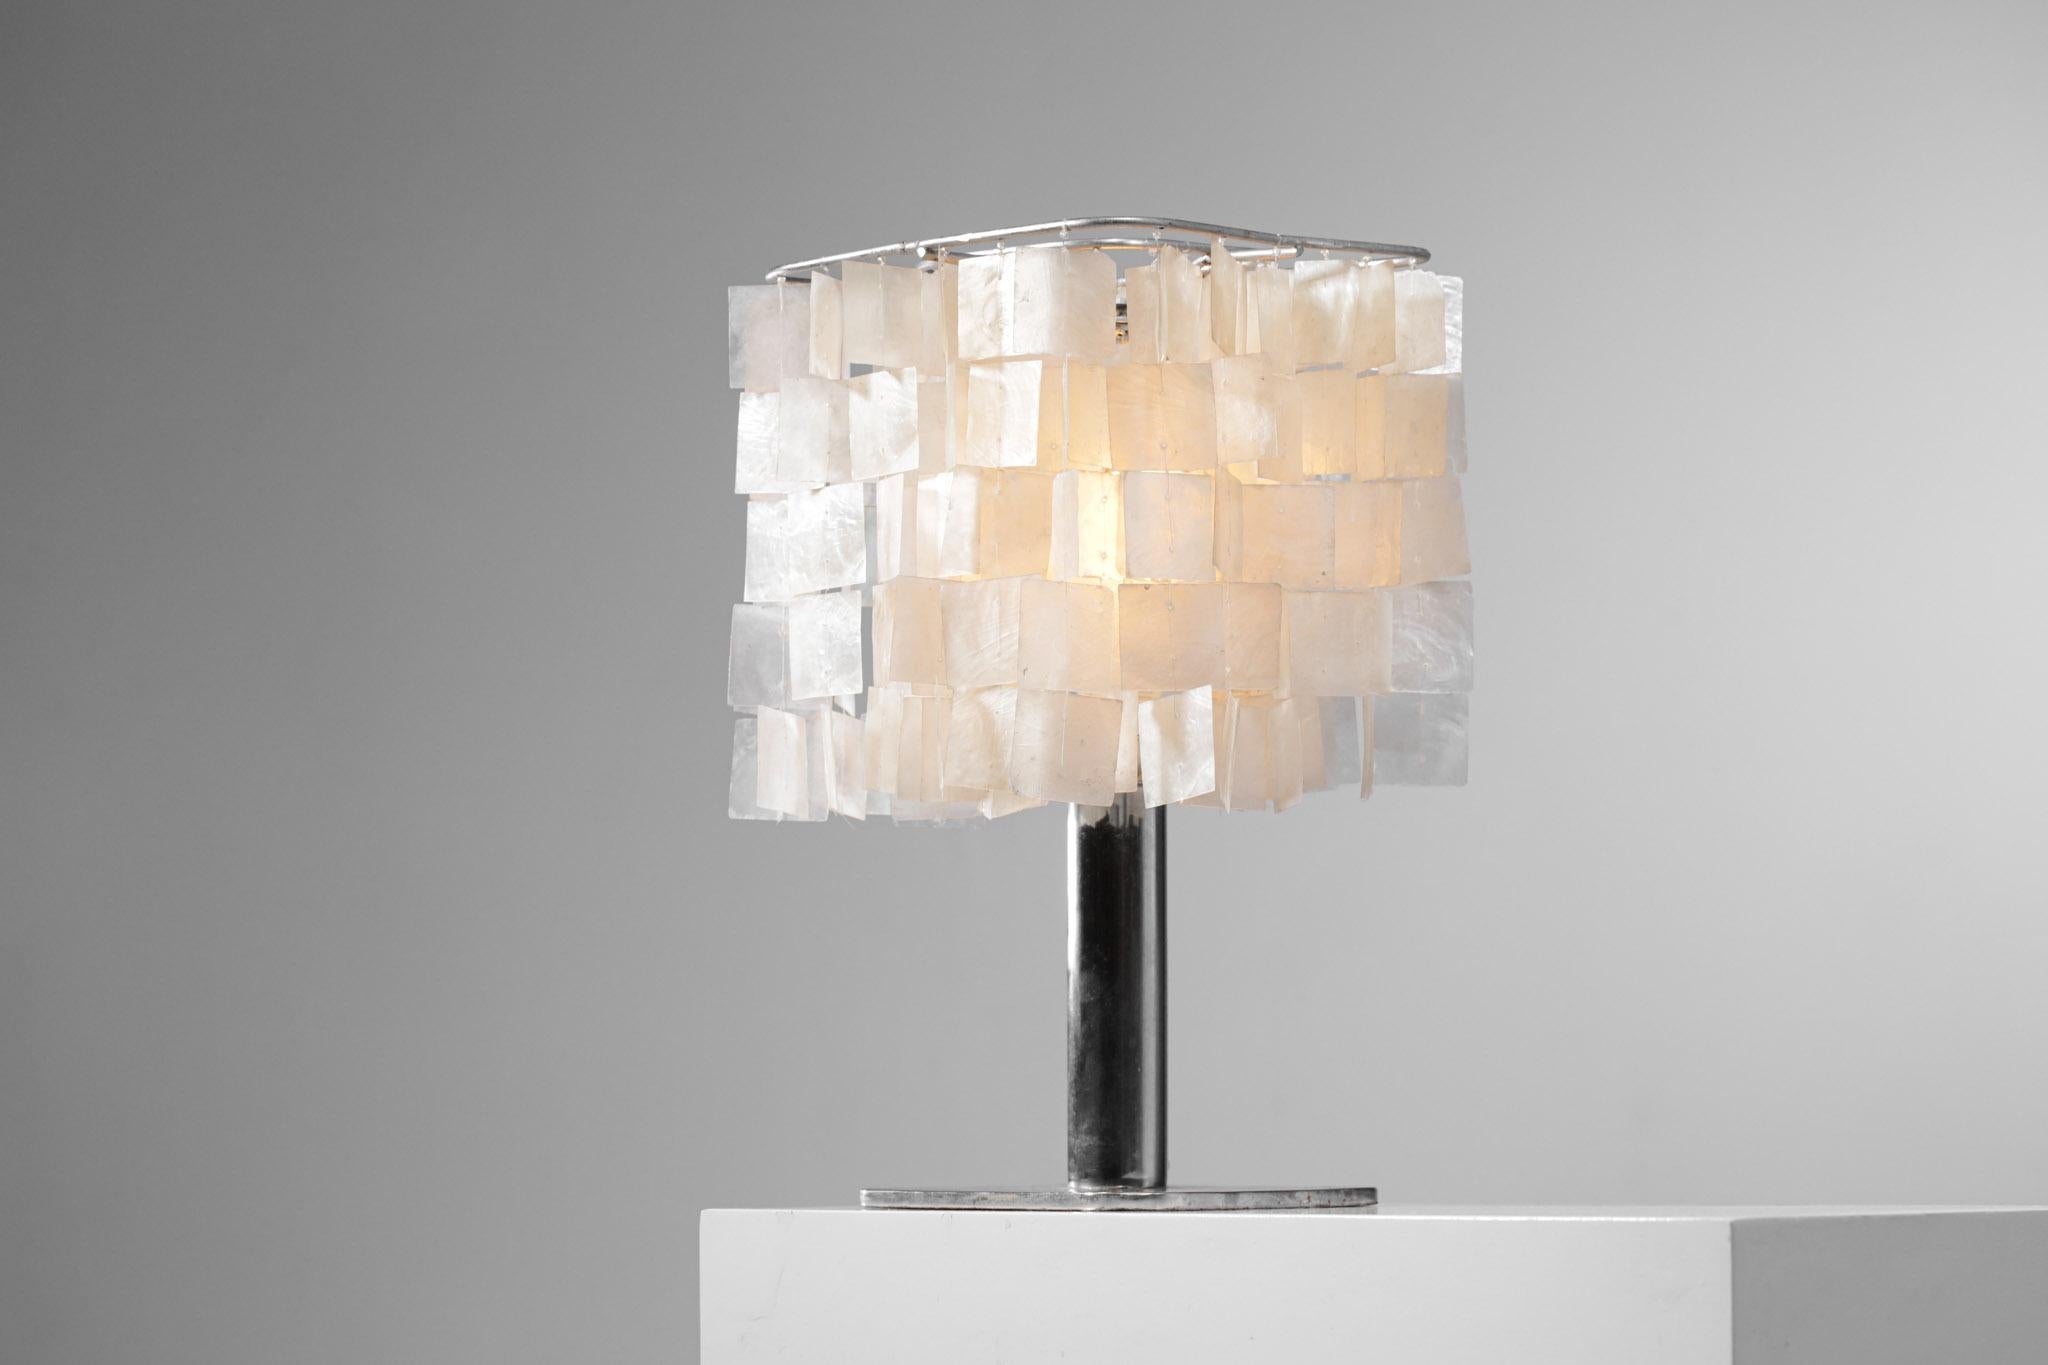 Handcrafted table lamp in the style of Verner Panton from the 70s. Chromed steel structure, cast aluminum base and lampshade made with garlands of mother of pearl squares. Very nice light effect with the mother-of-pearl, very decorative lamp. Nice